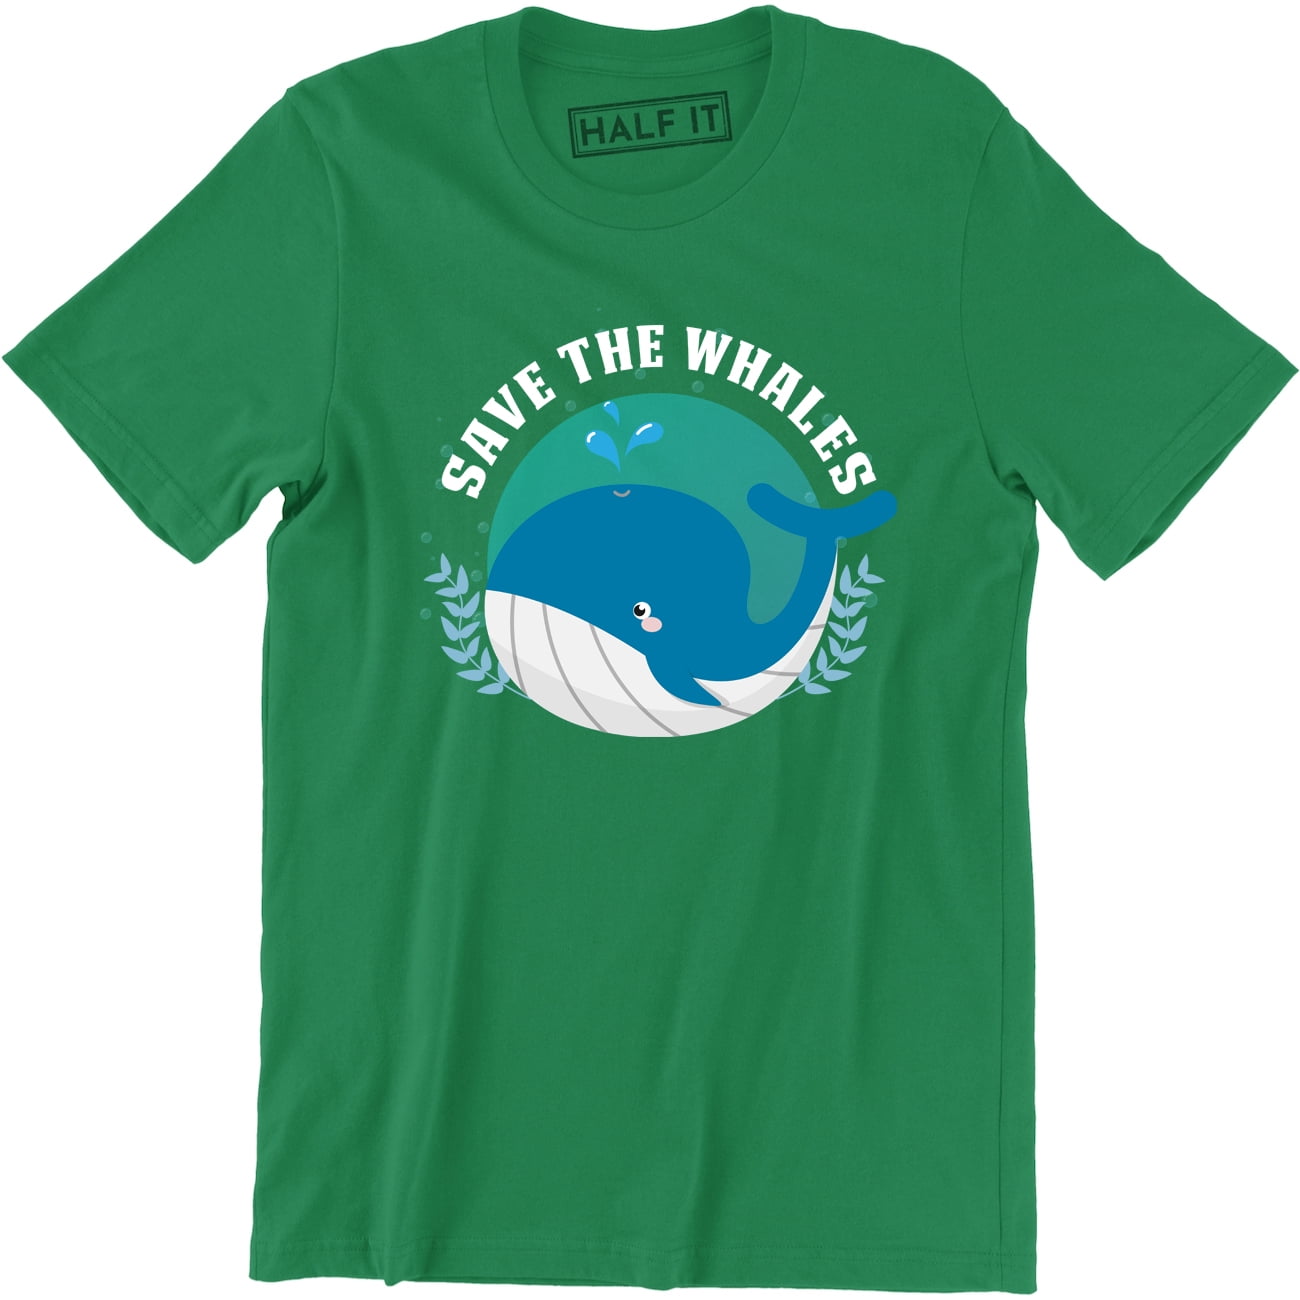 Half It - Save The Whales - Funny World Peace Narwhals Men's Tee Shirt ...